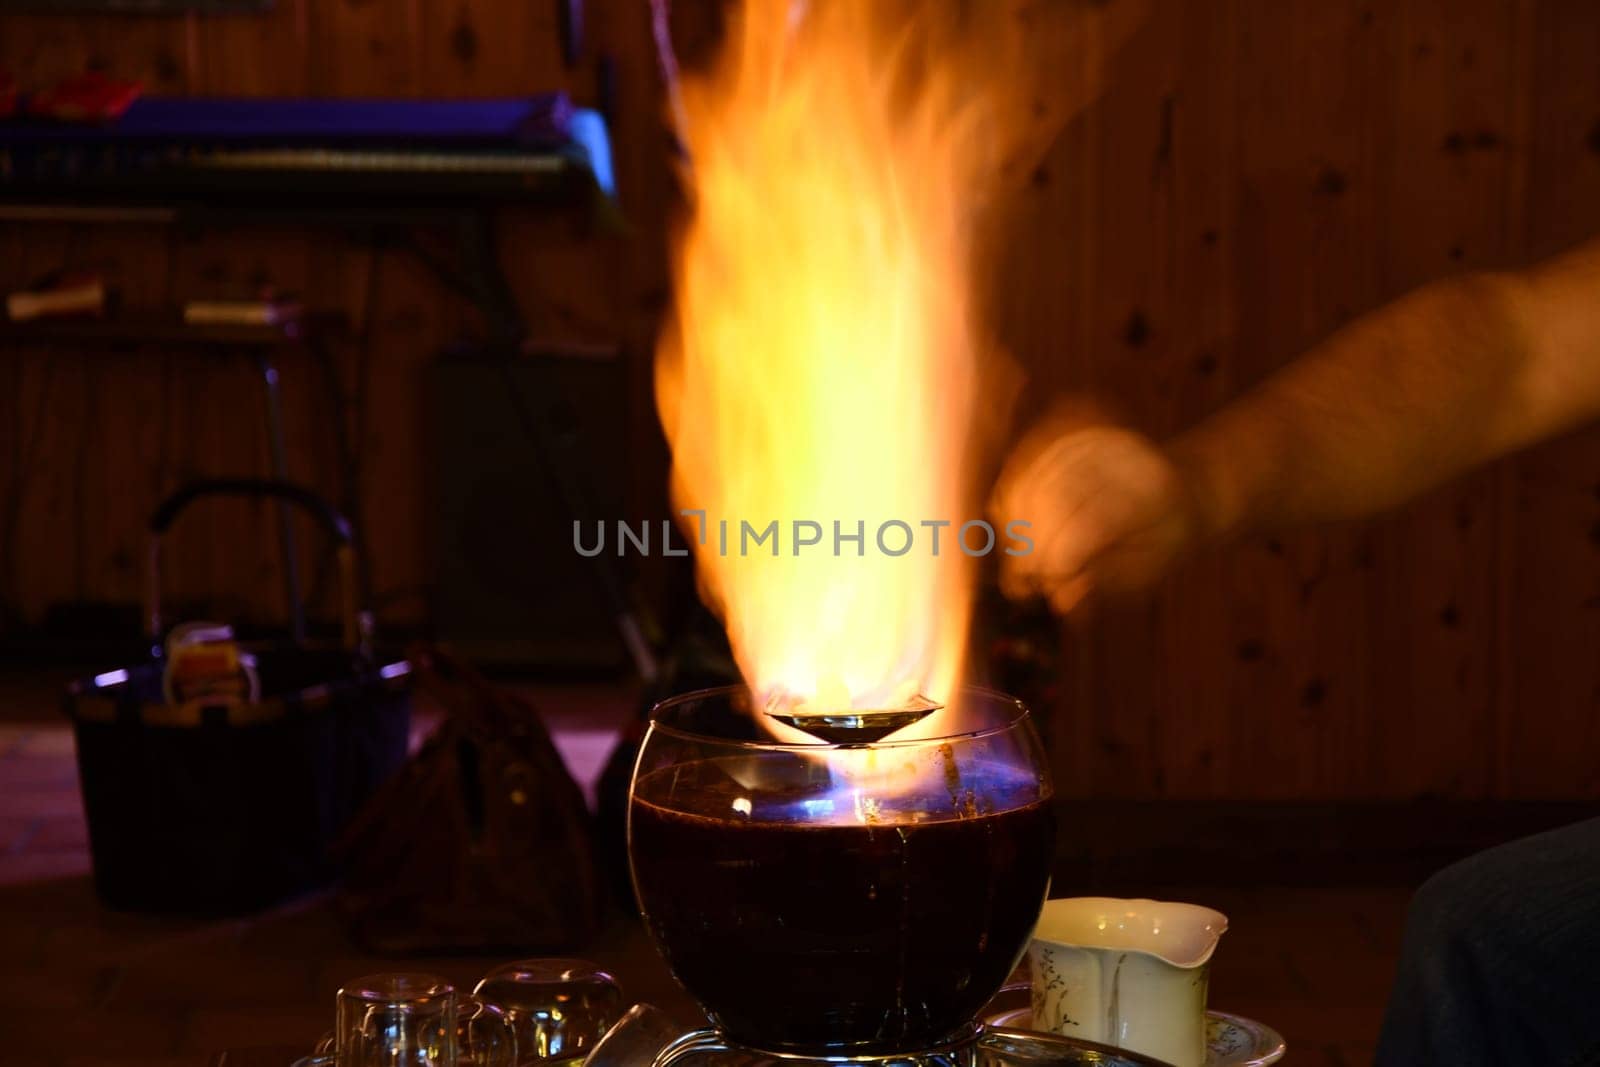 Burning sugarloaf over a bowl of Feuerzangenbowle on a restaurant table